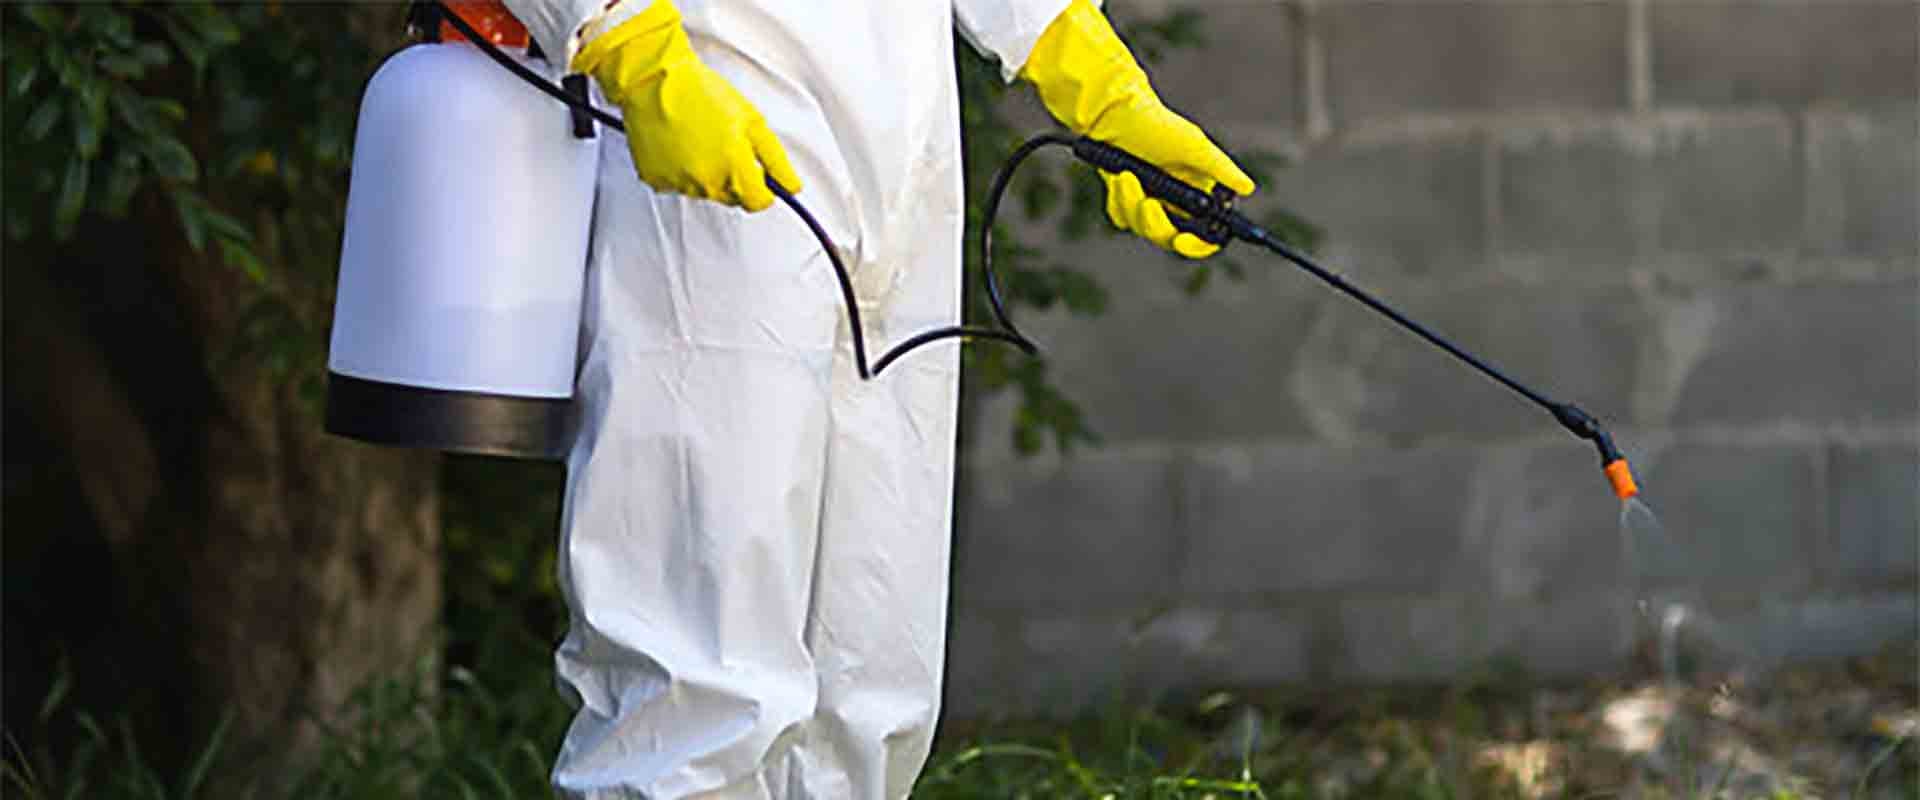 All You Need To Know About Termite Treatment And Lawn Pest Control In Southern California